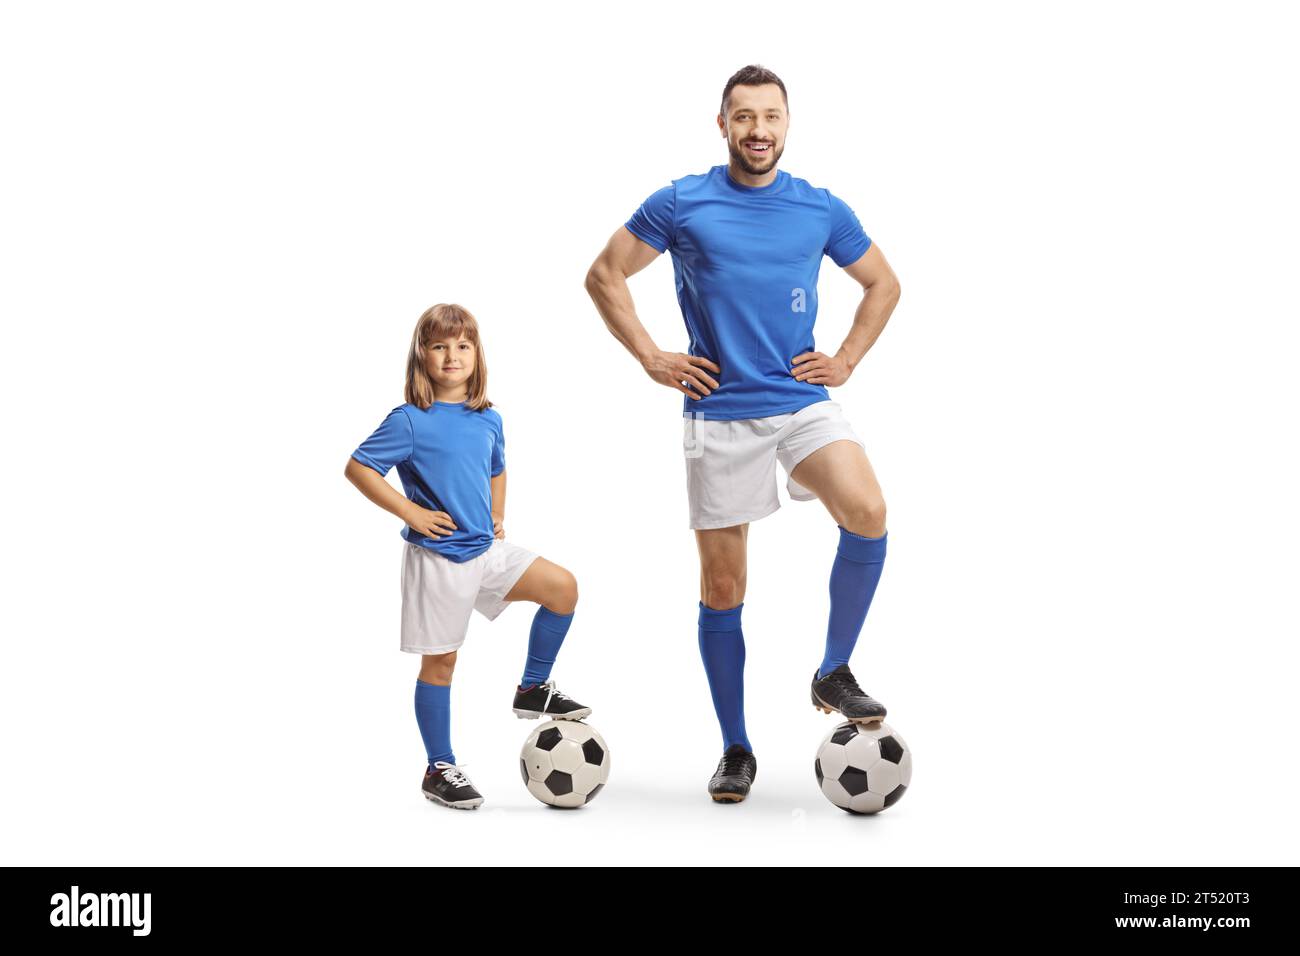 Girl in sports jersey standing with foot on top of a football next to a footballer isolated on white background Stock Photo